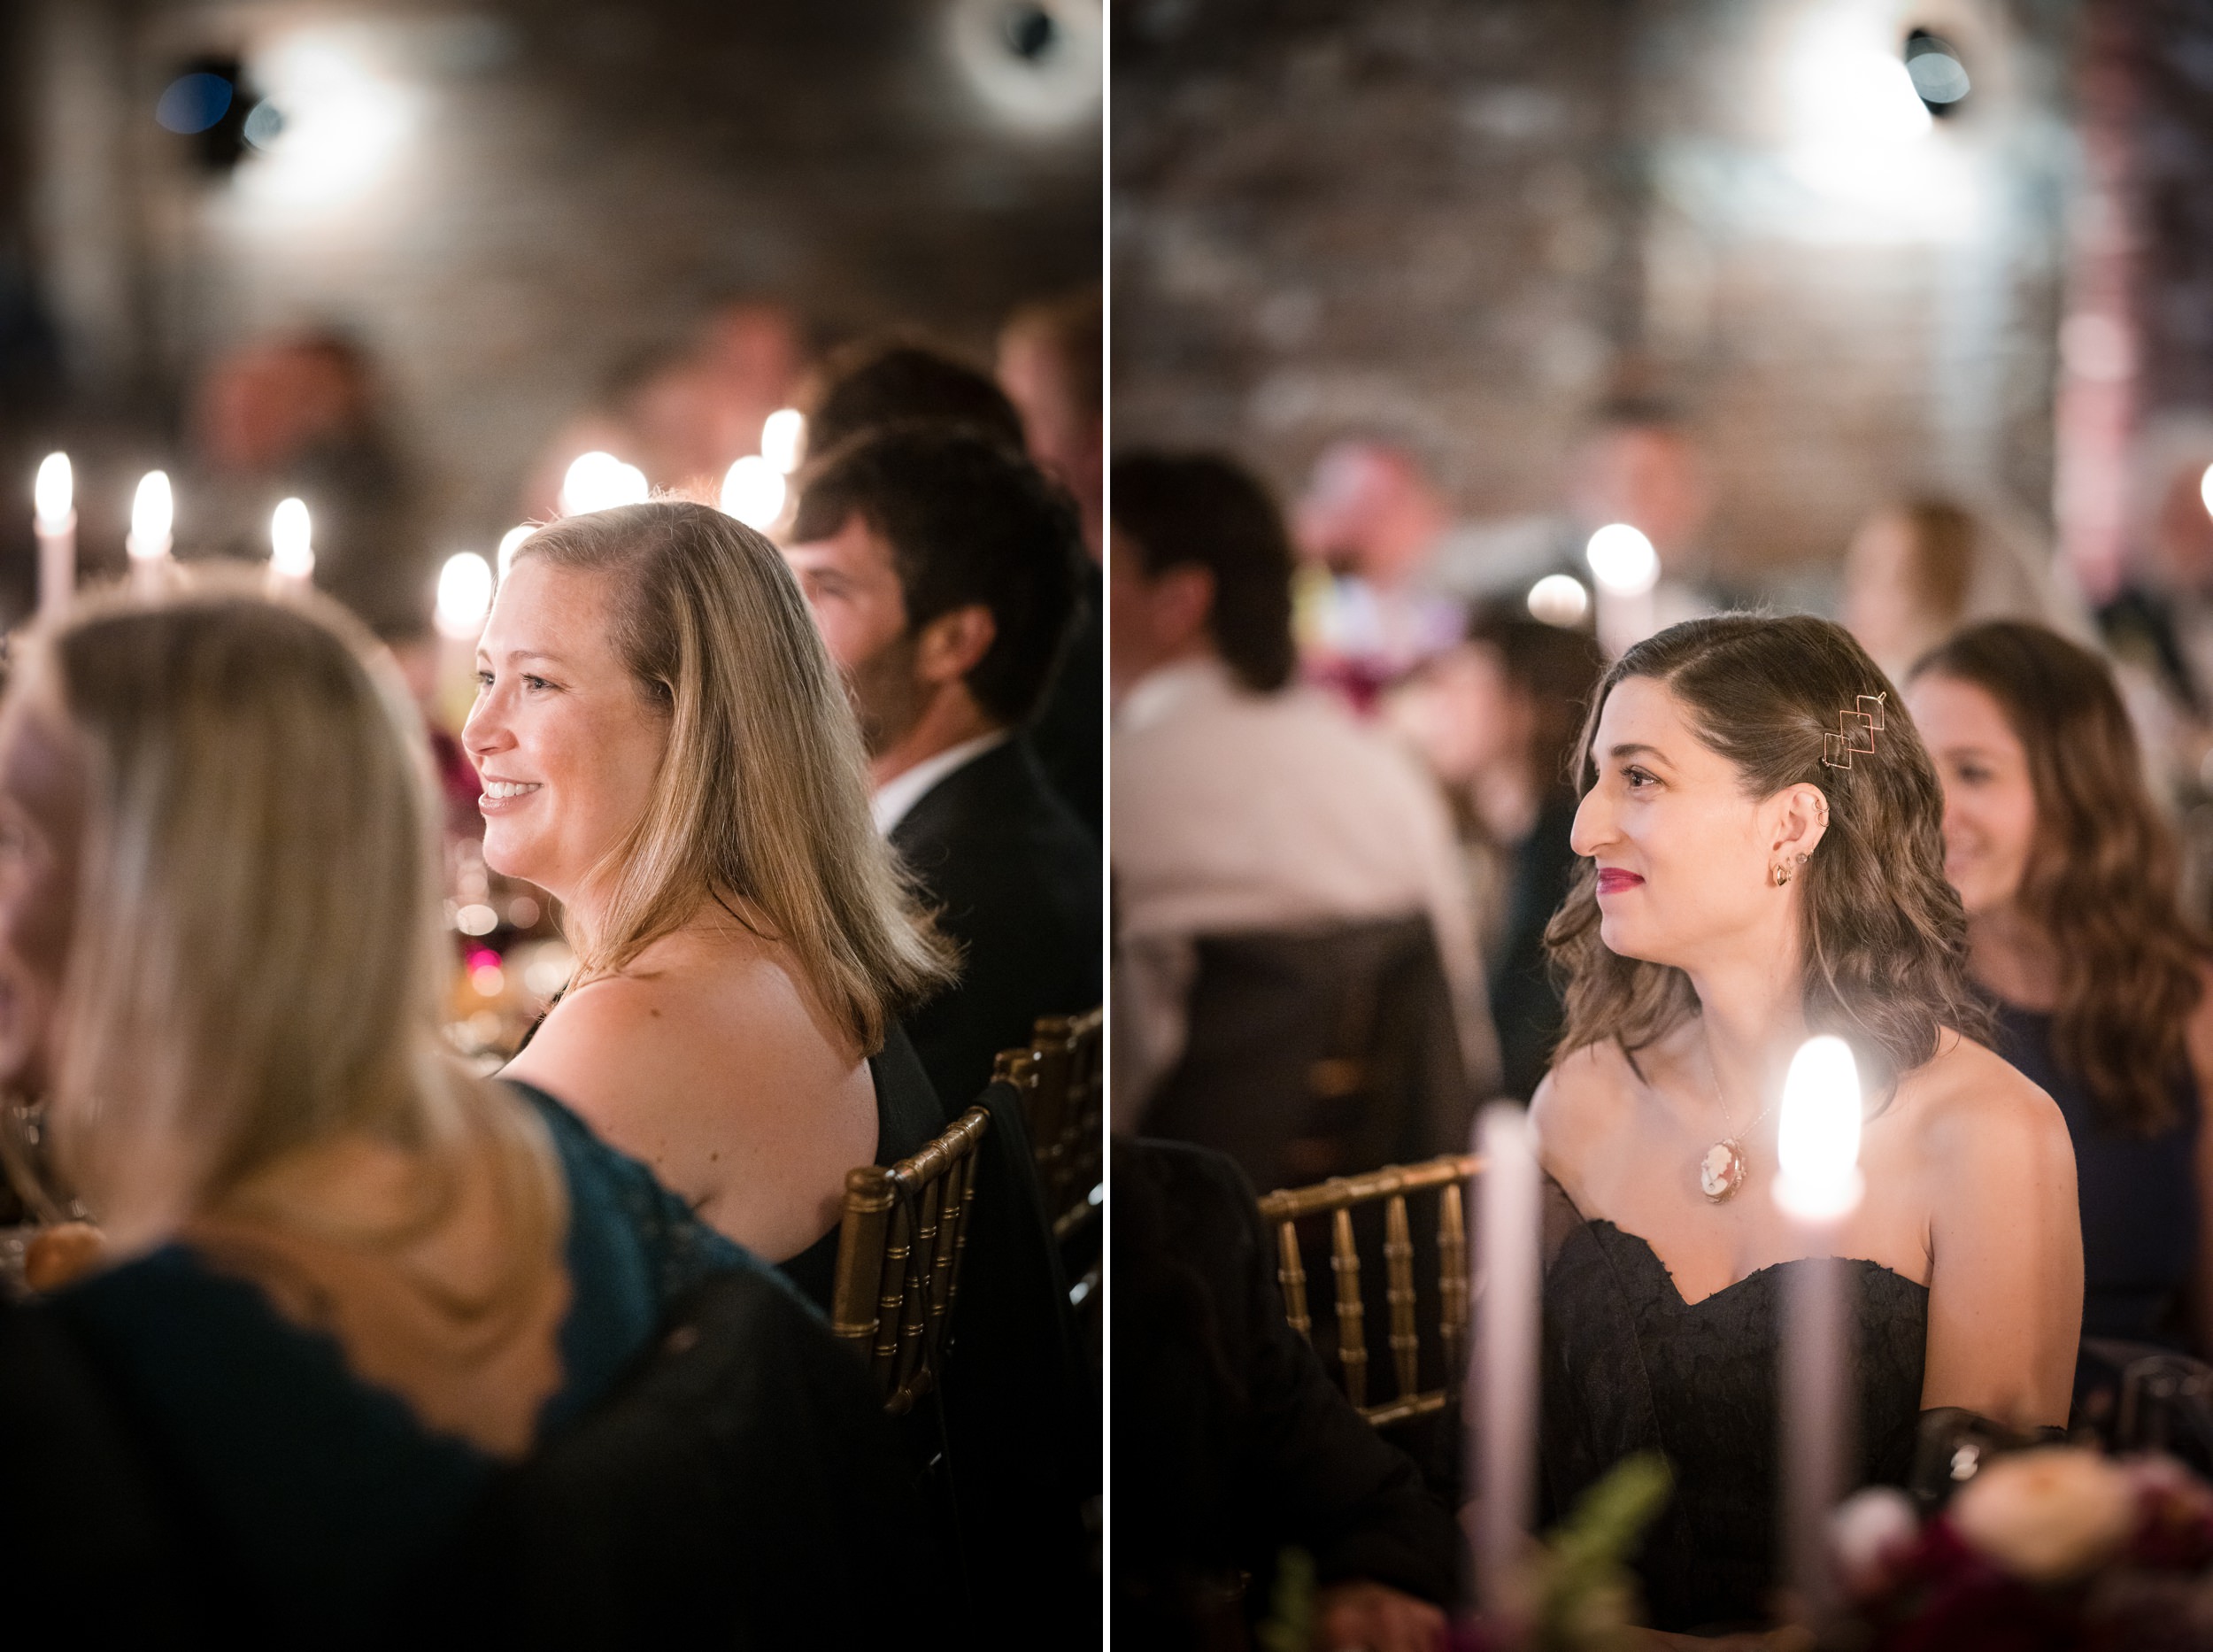 Wedding guests reacting to a toast at a Beekman Hotel wedding in NYC